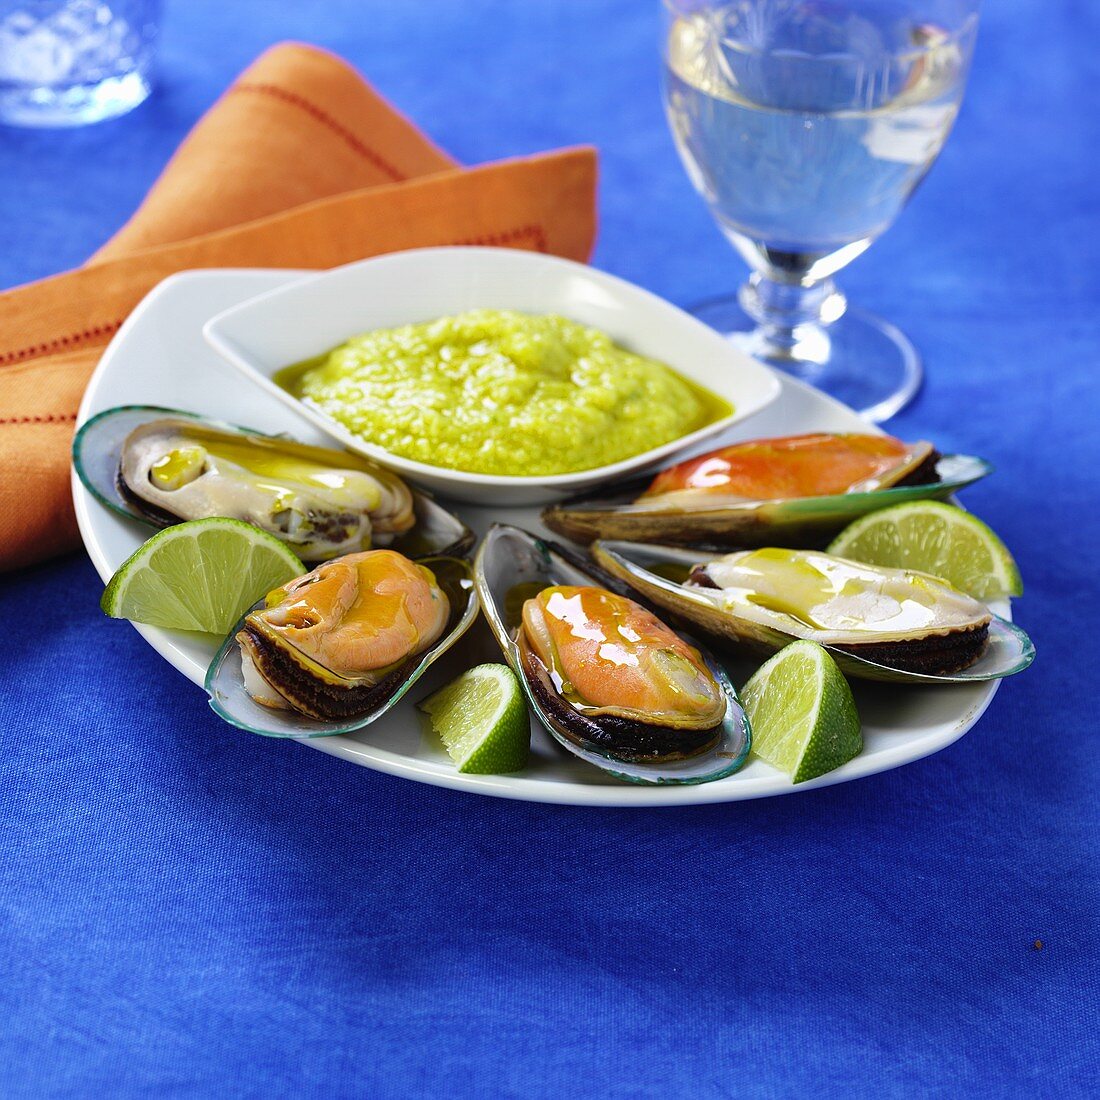 Mussels with vegetable dip